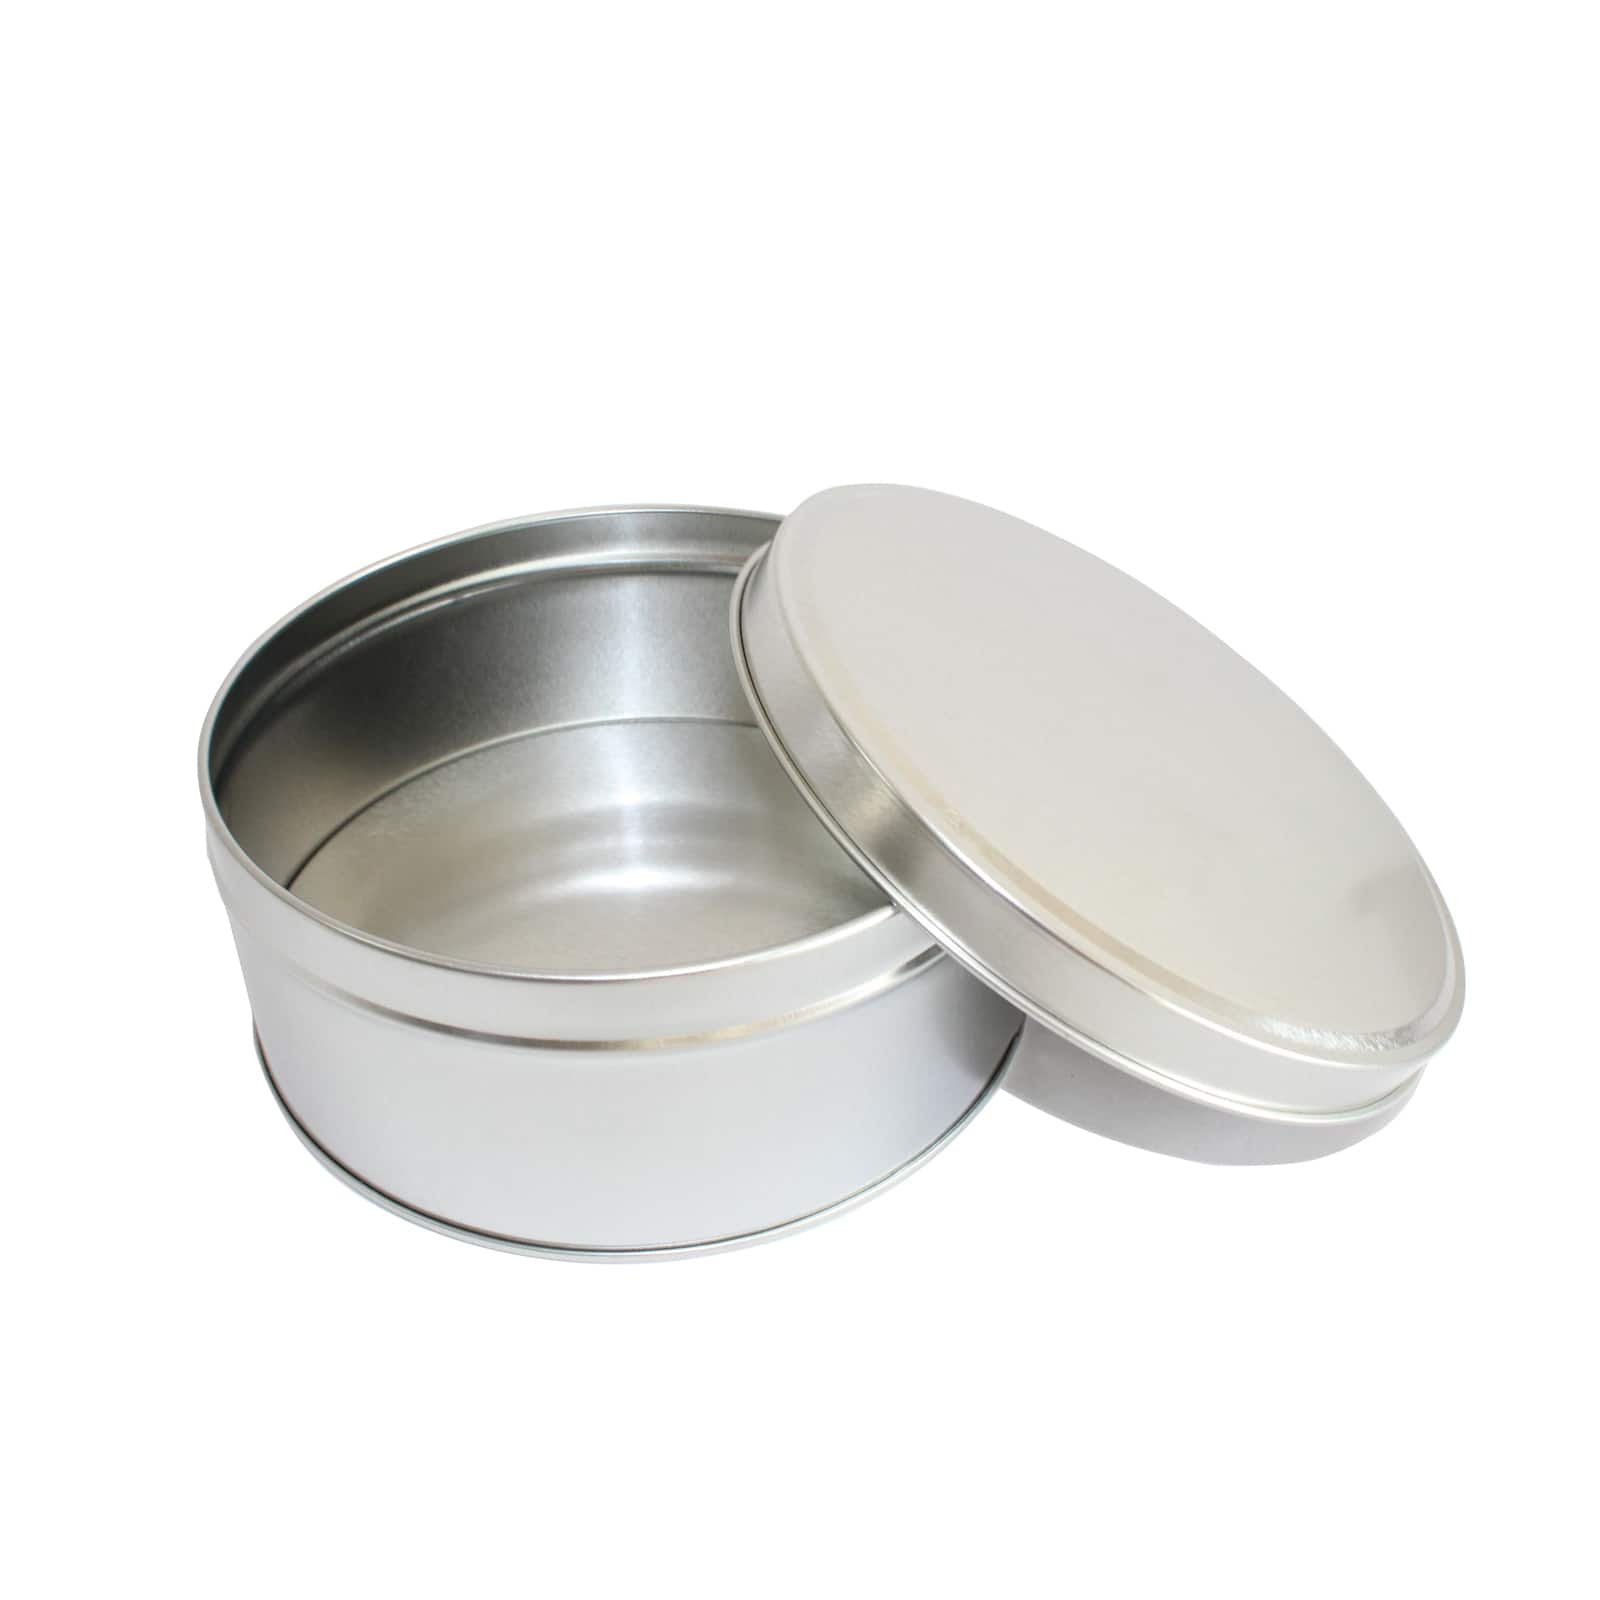 Bossico Small Round Gift Tins Cute Empty Metal Tin Box with Lids 4 1/4 for Cookie Candy and Card 